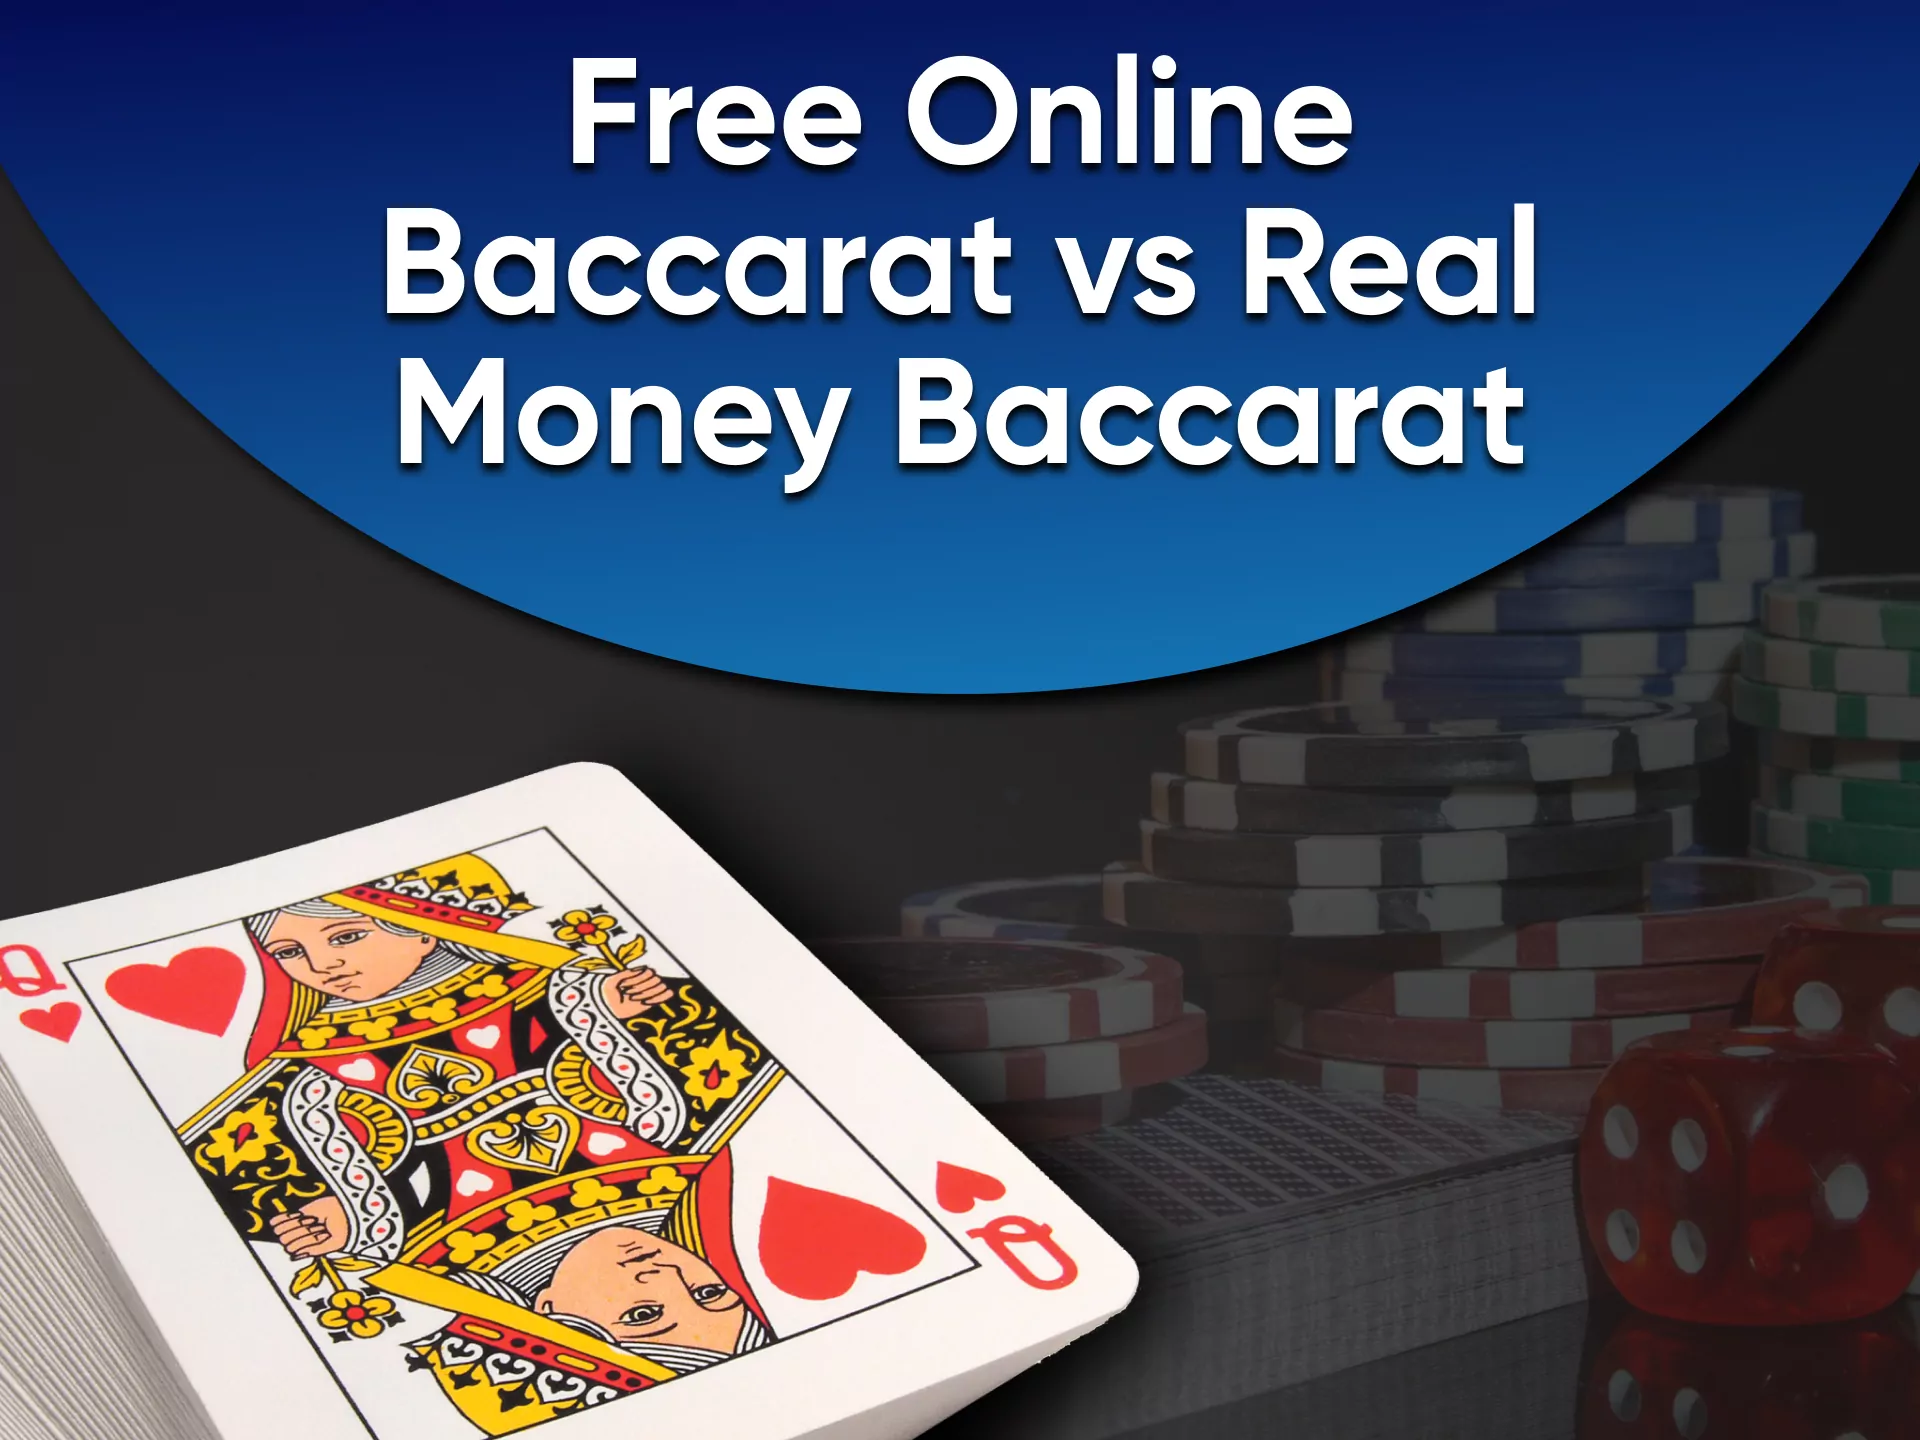 Train in no real bet mode with Baccarat.